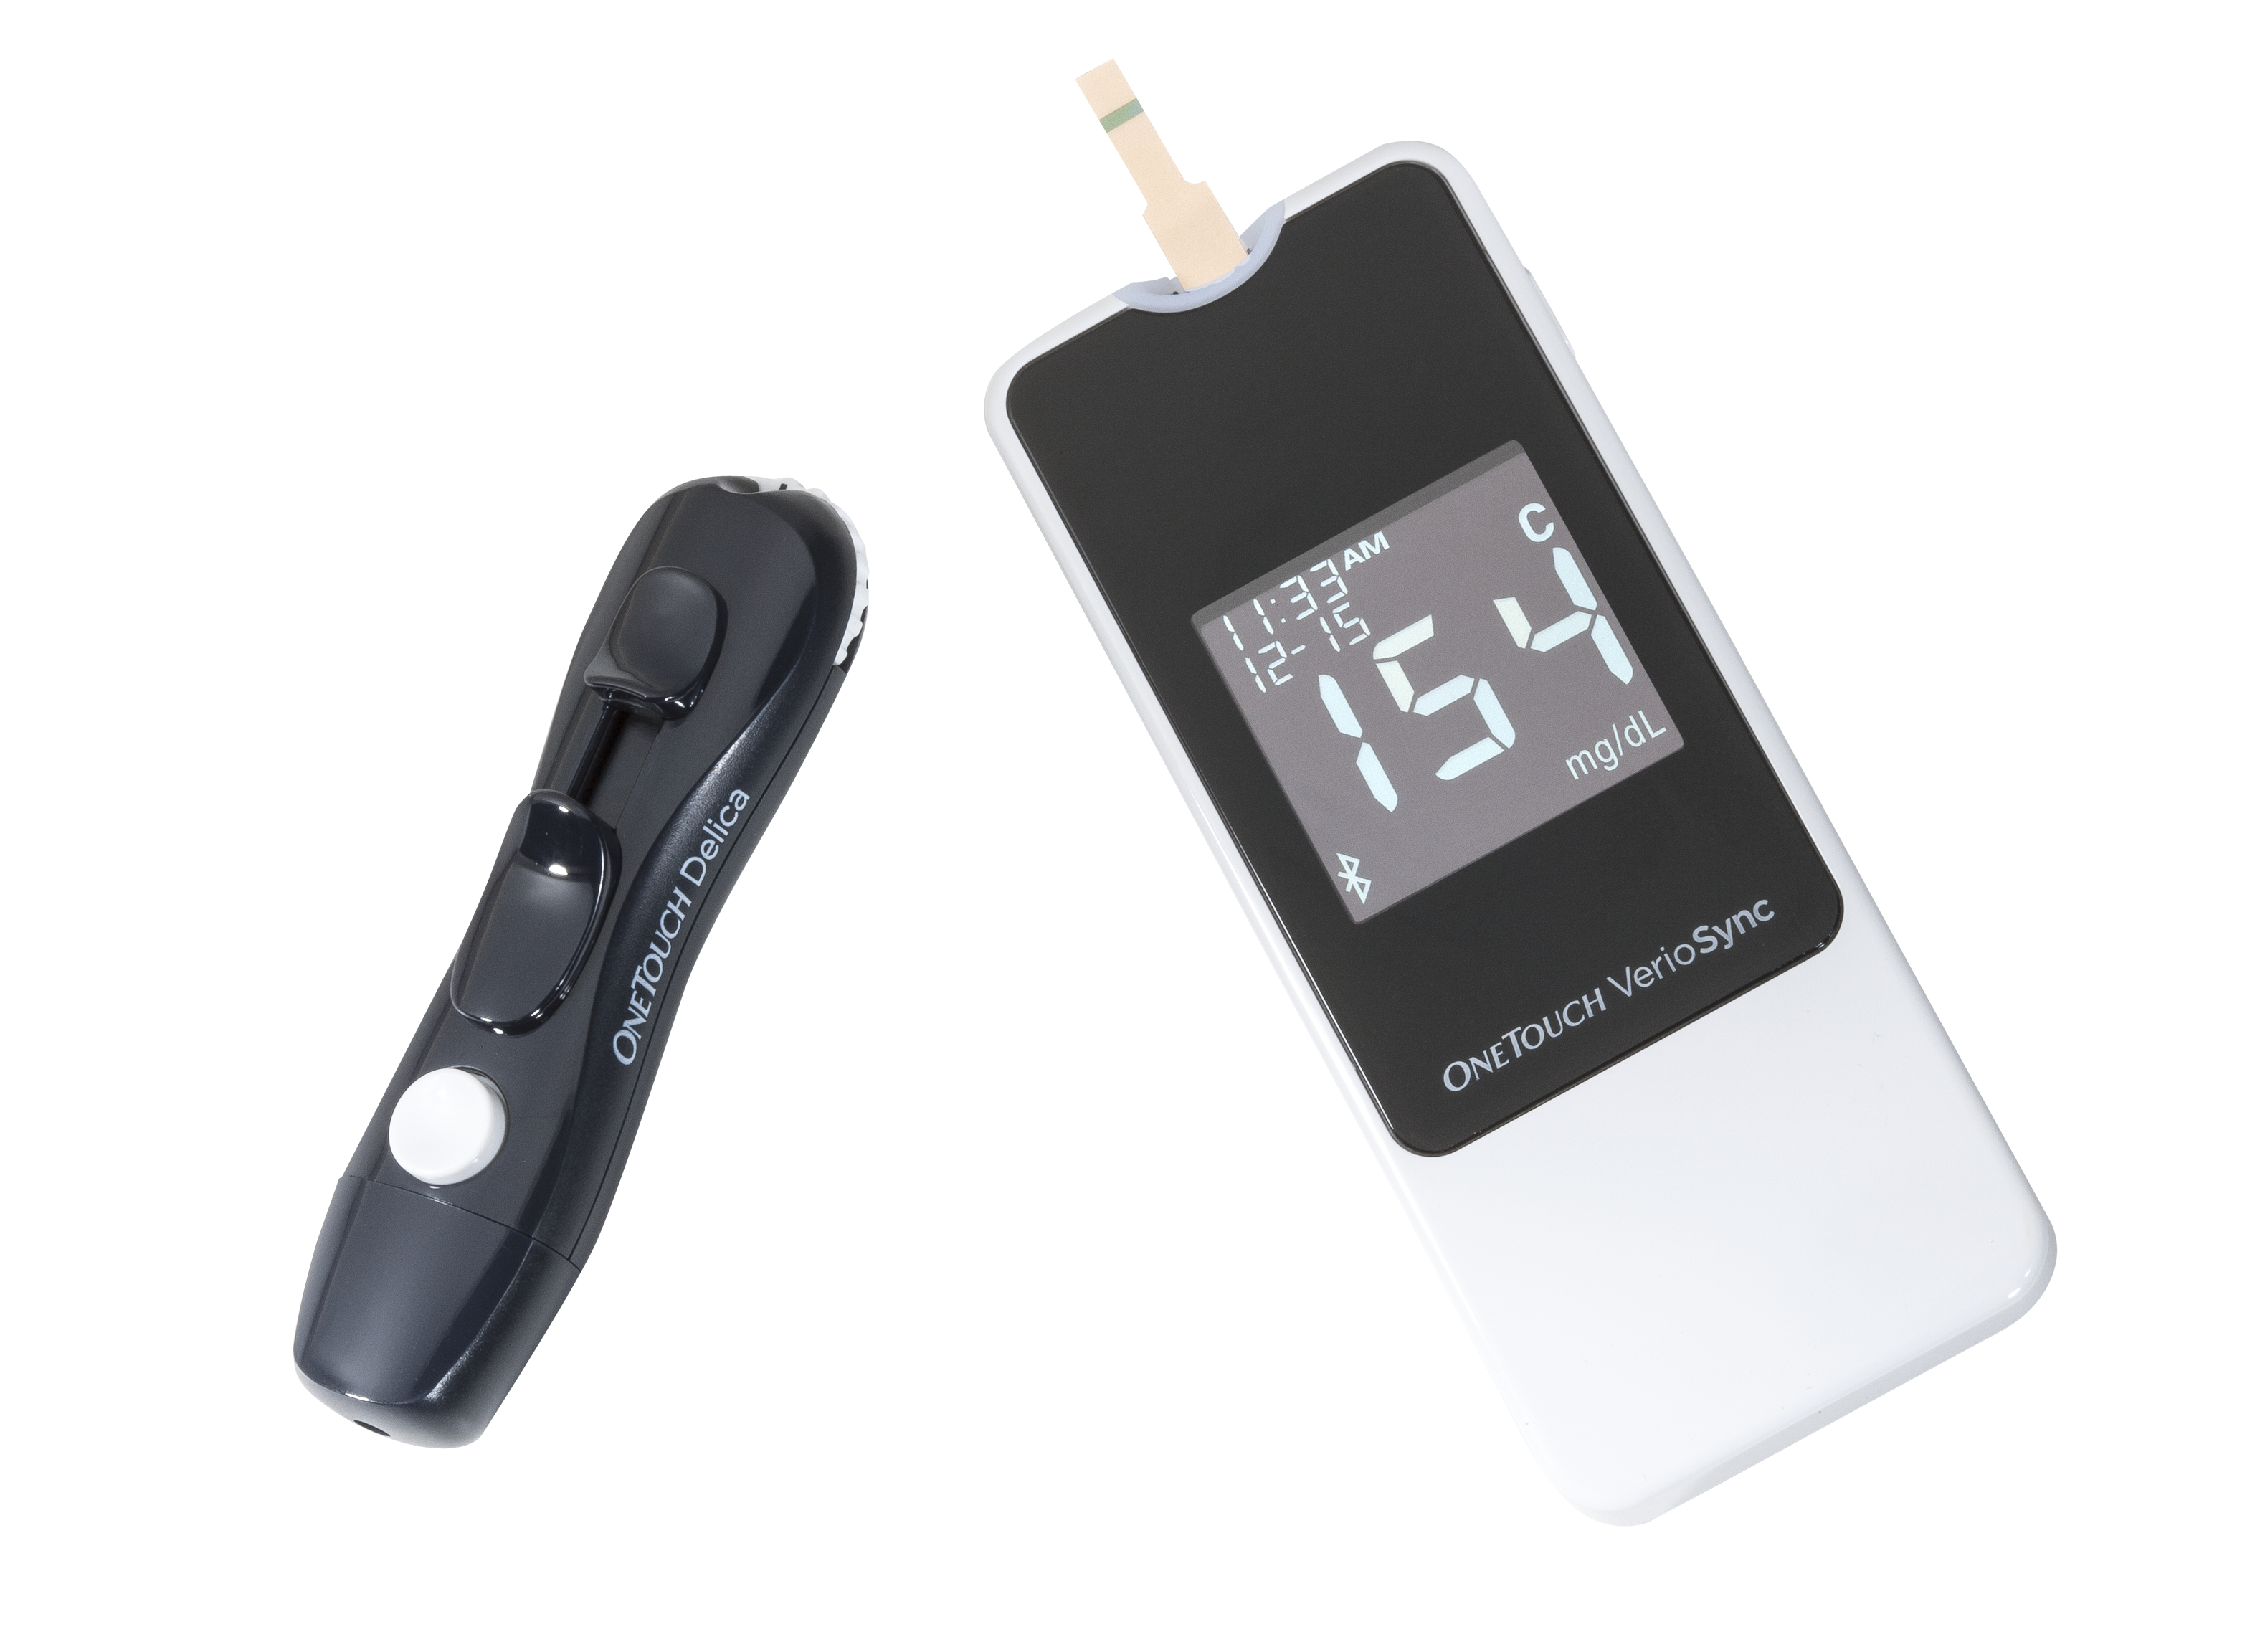 OneTouch Verio Sync Blood Glucose Meter Review - Consumer Reports